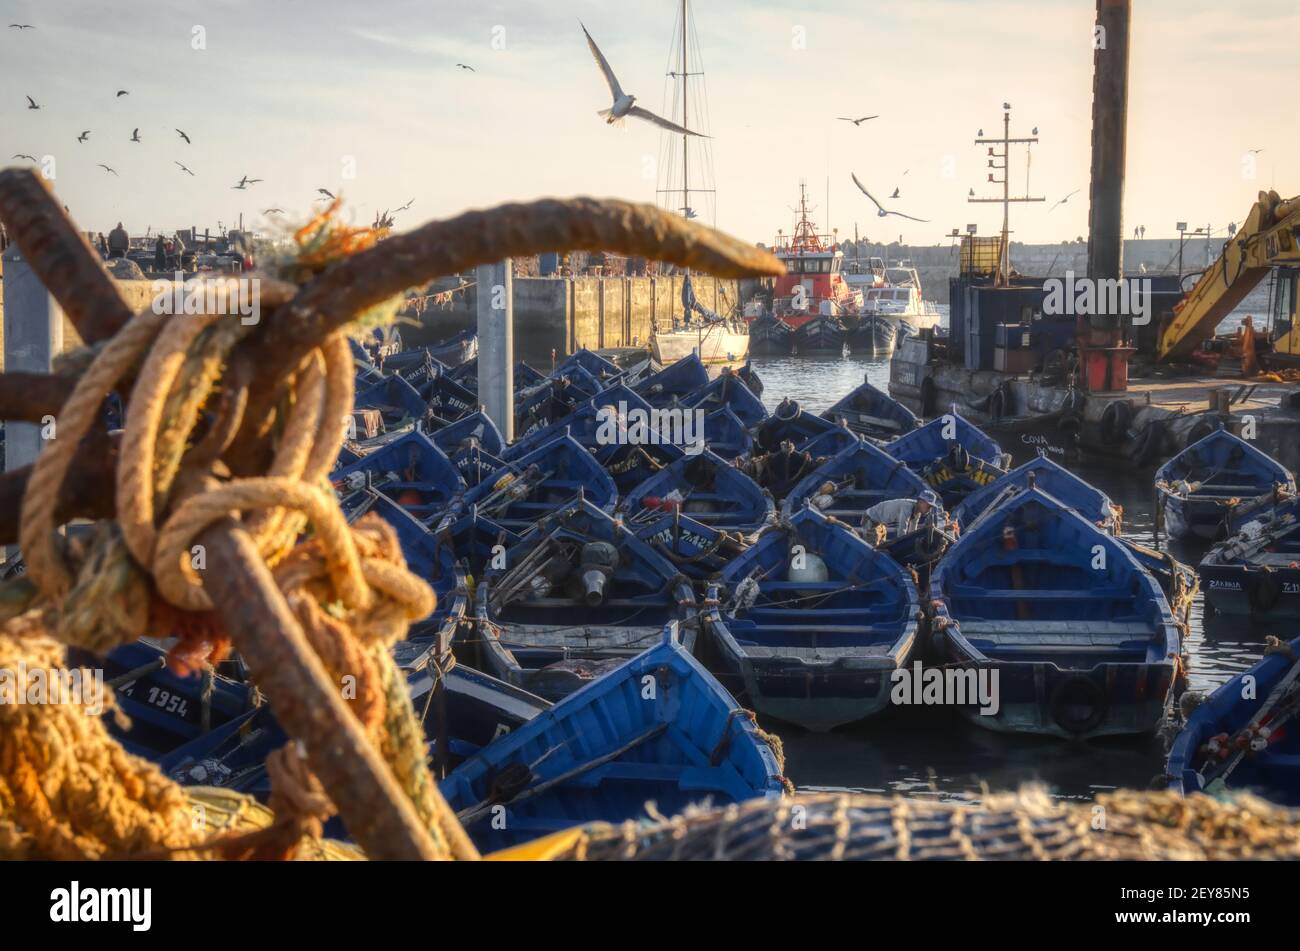 Romantic small fishing harbour with blue fishing boats Stock Photo